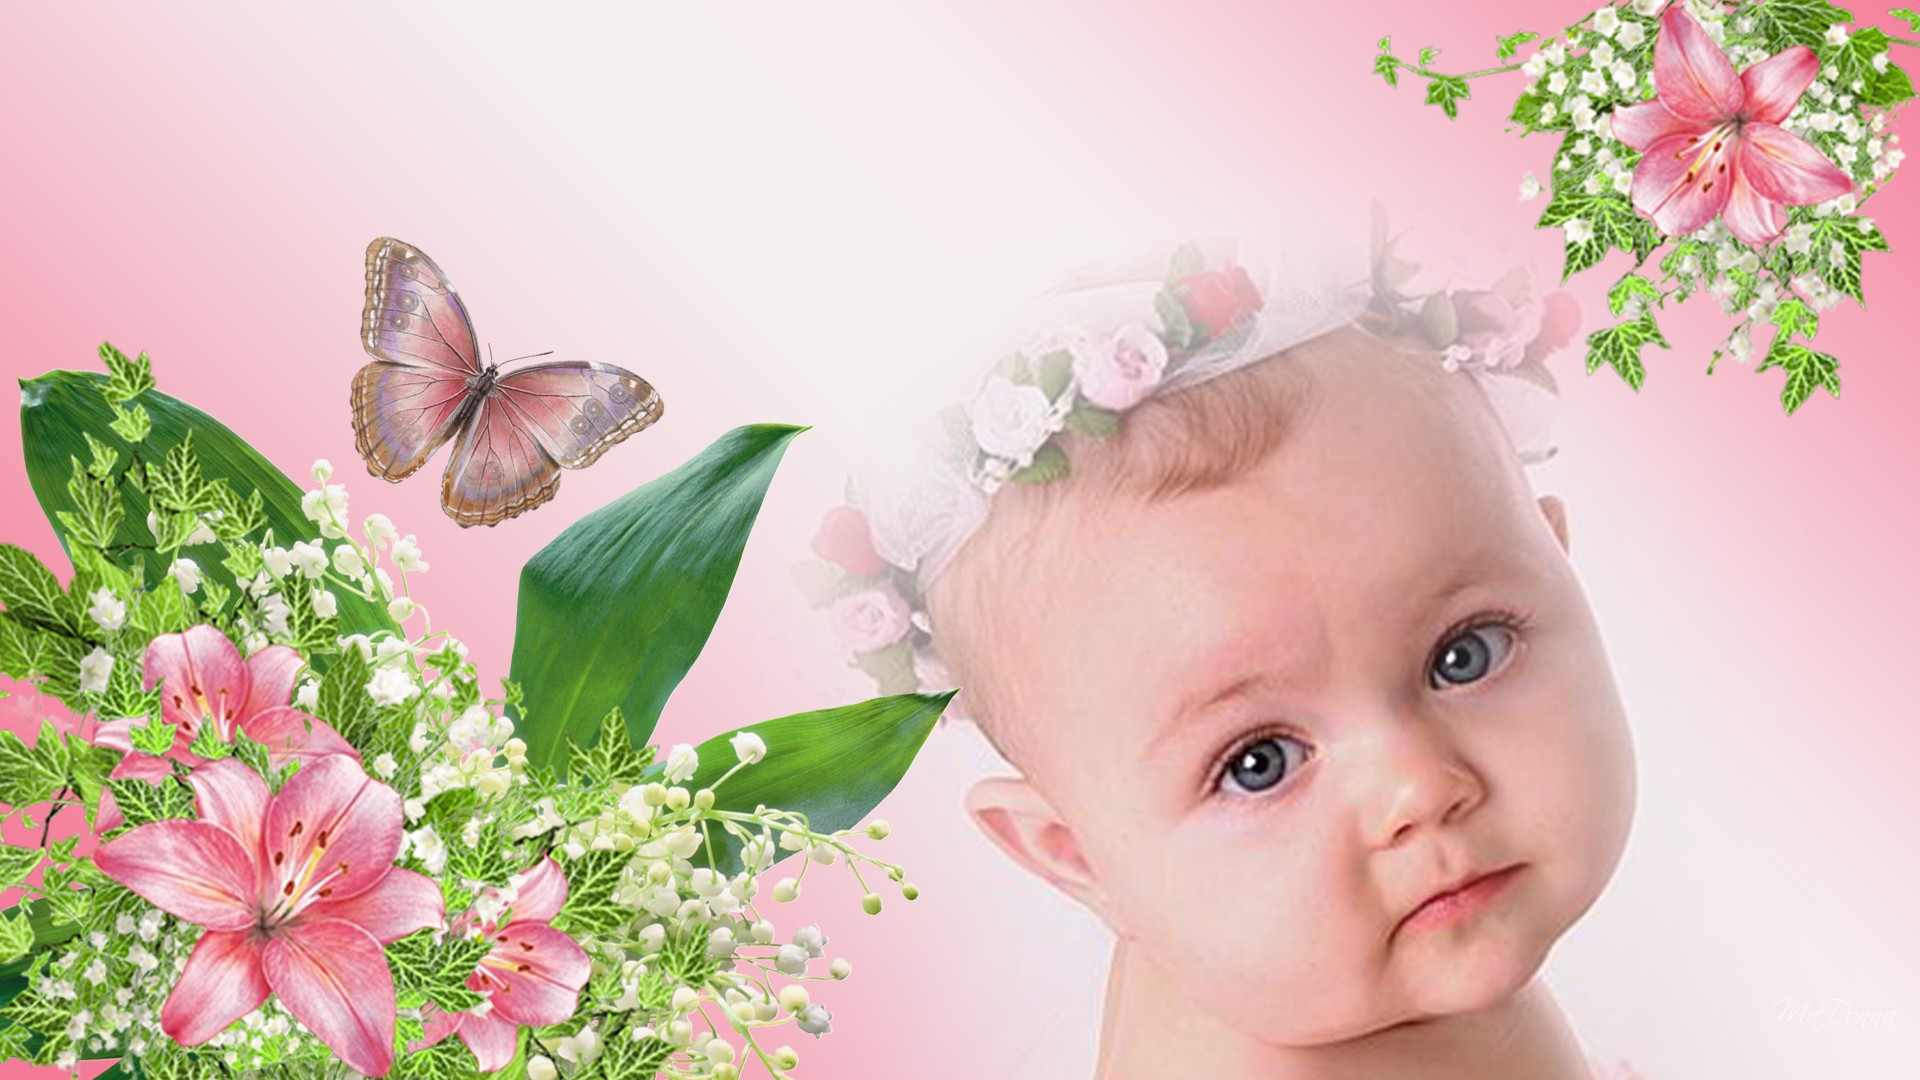 Wallpaper Of Baby Collection 41